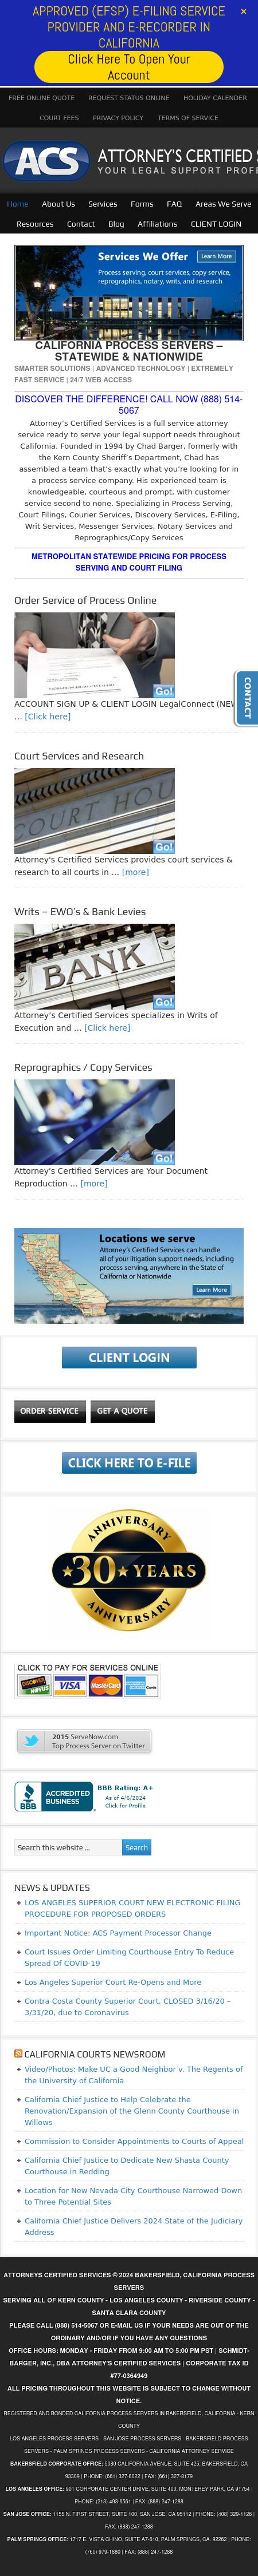 Attorney's Certified Services - Bakersfield CA Lawyers